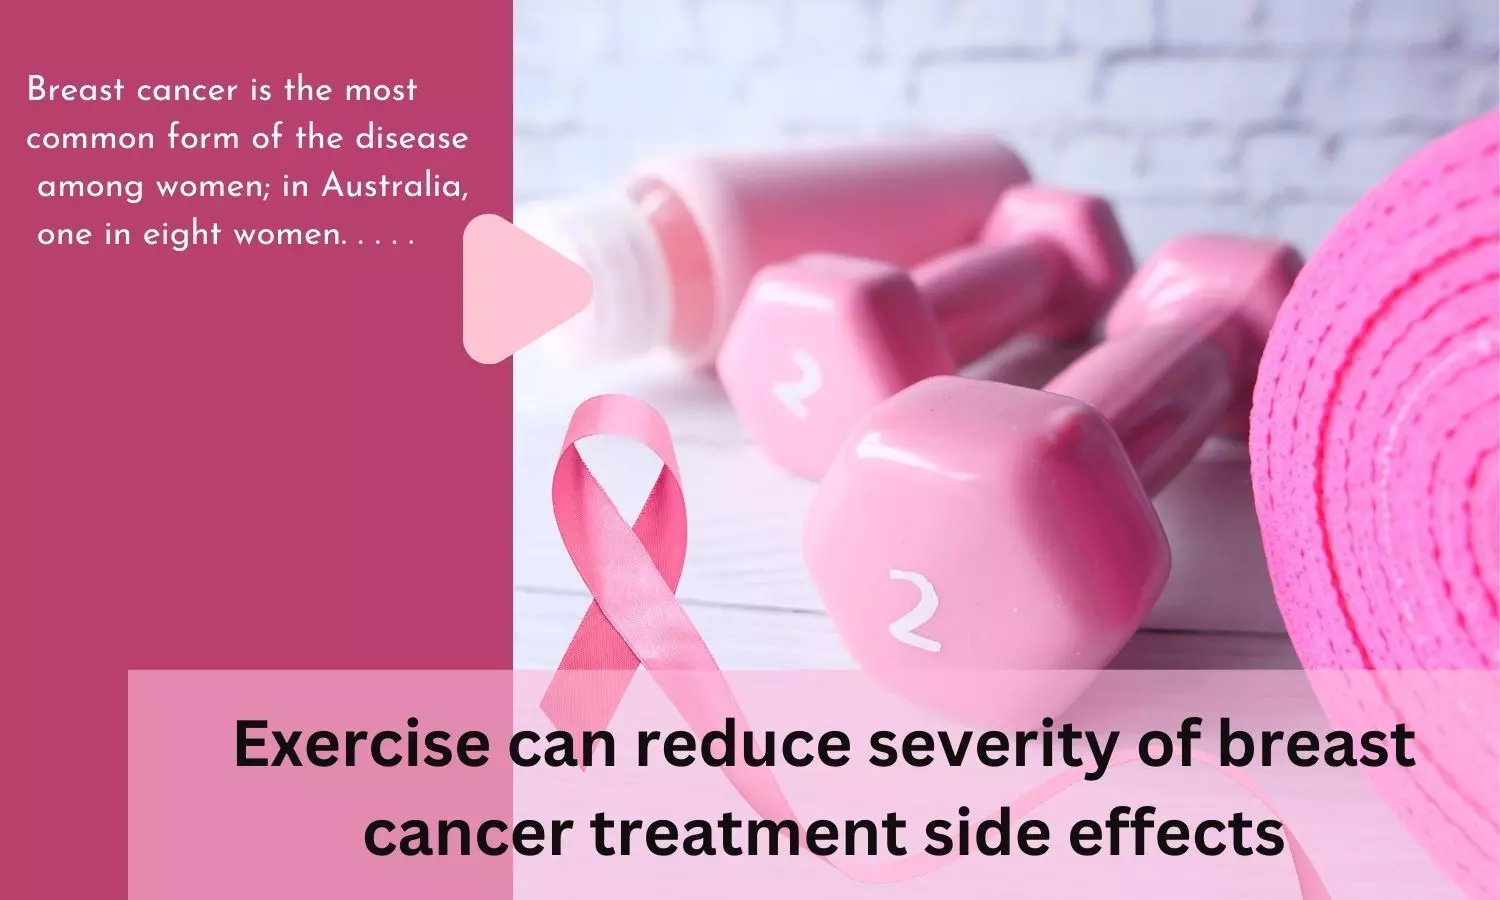 Exercise can reduce severity of breast cancer treatment side effects